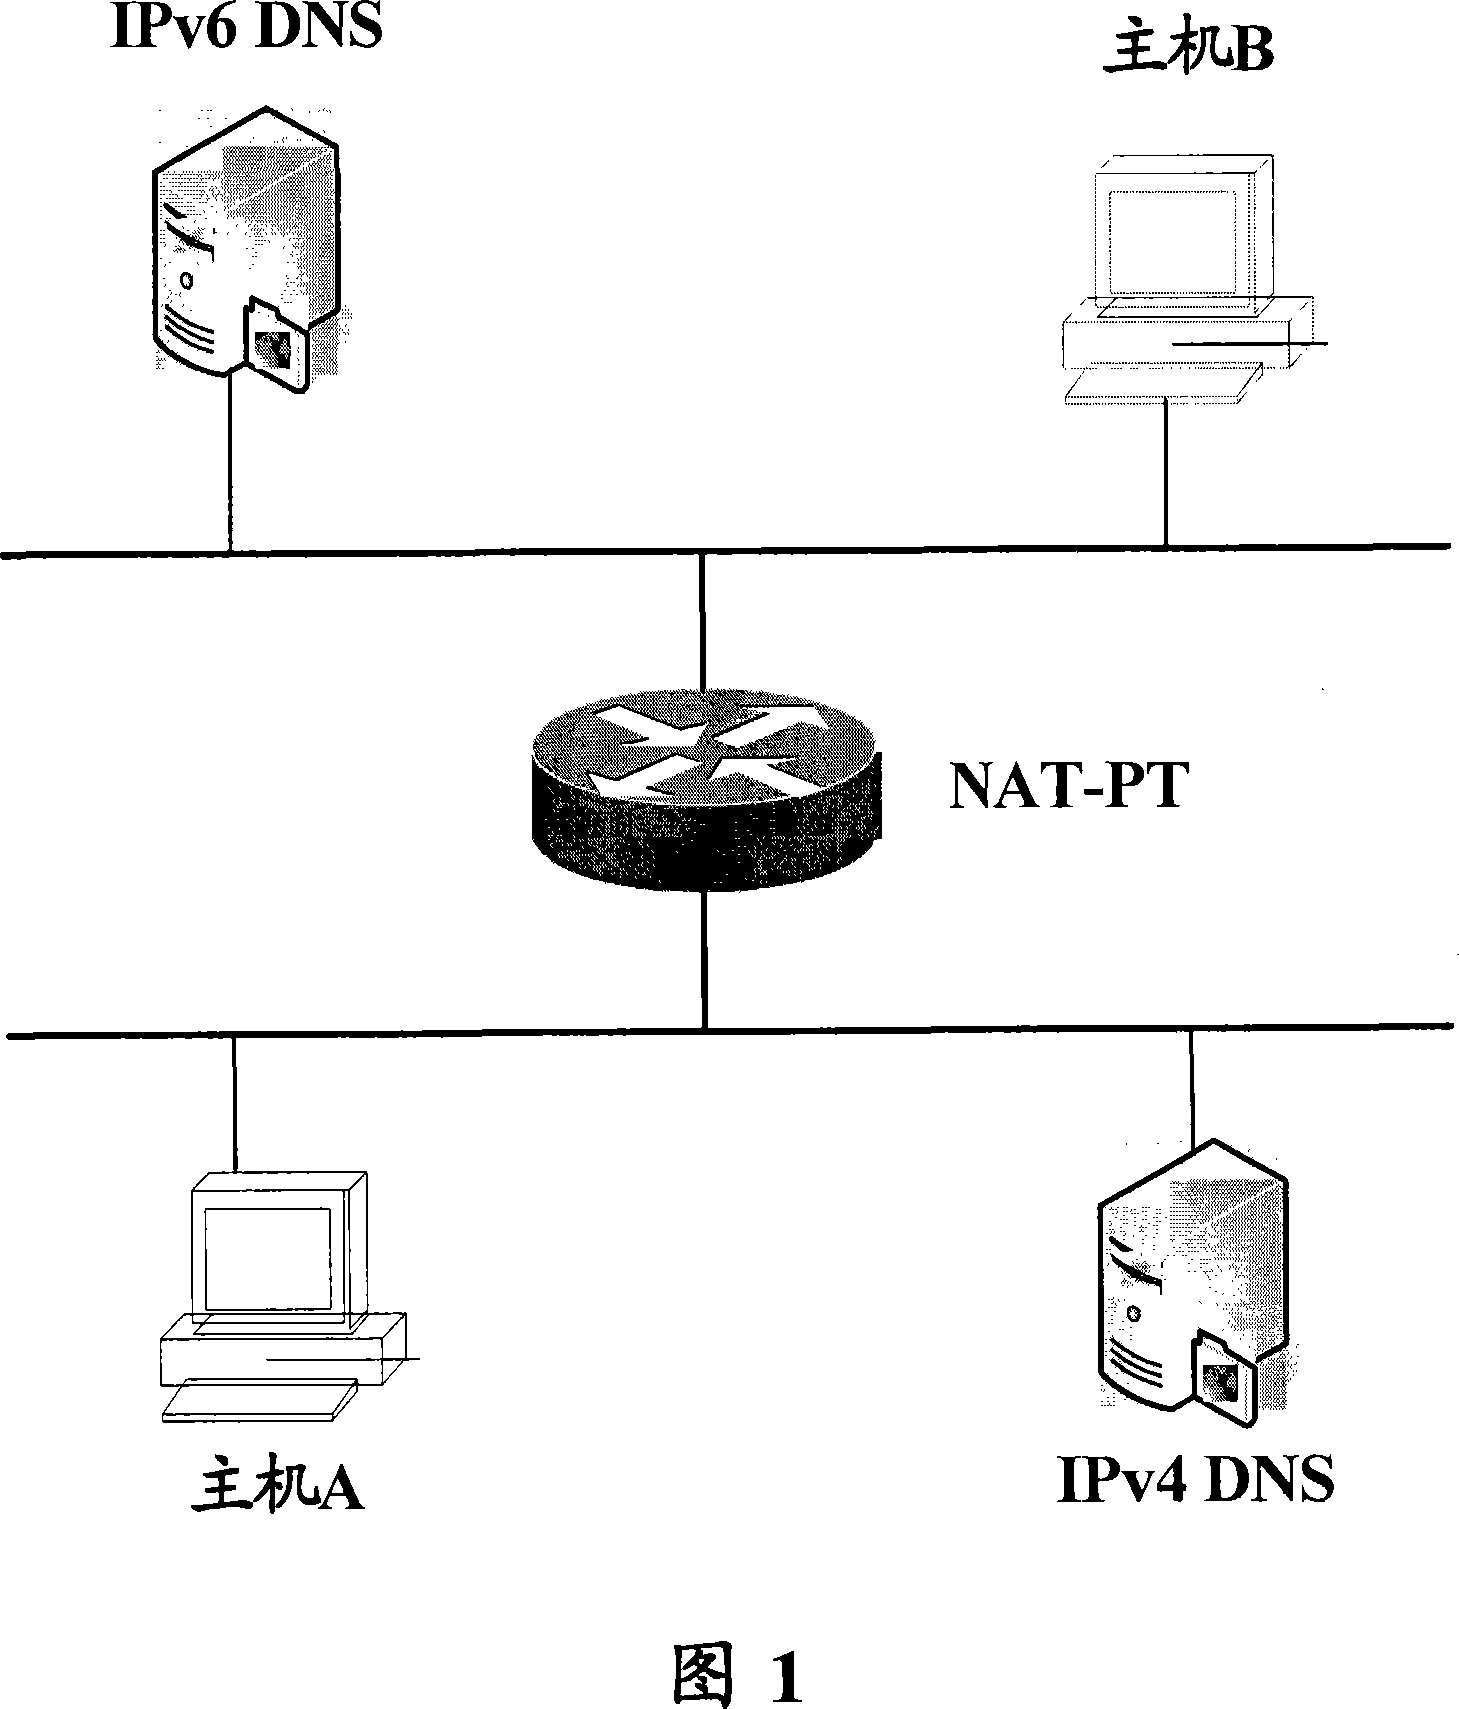 Method and router for IPv4 network host access to IPv6 network host